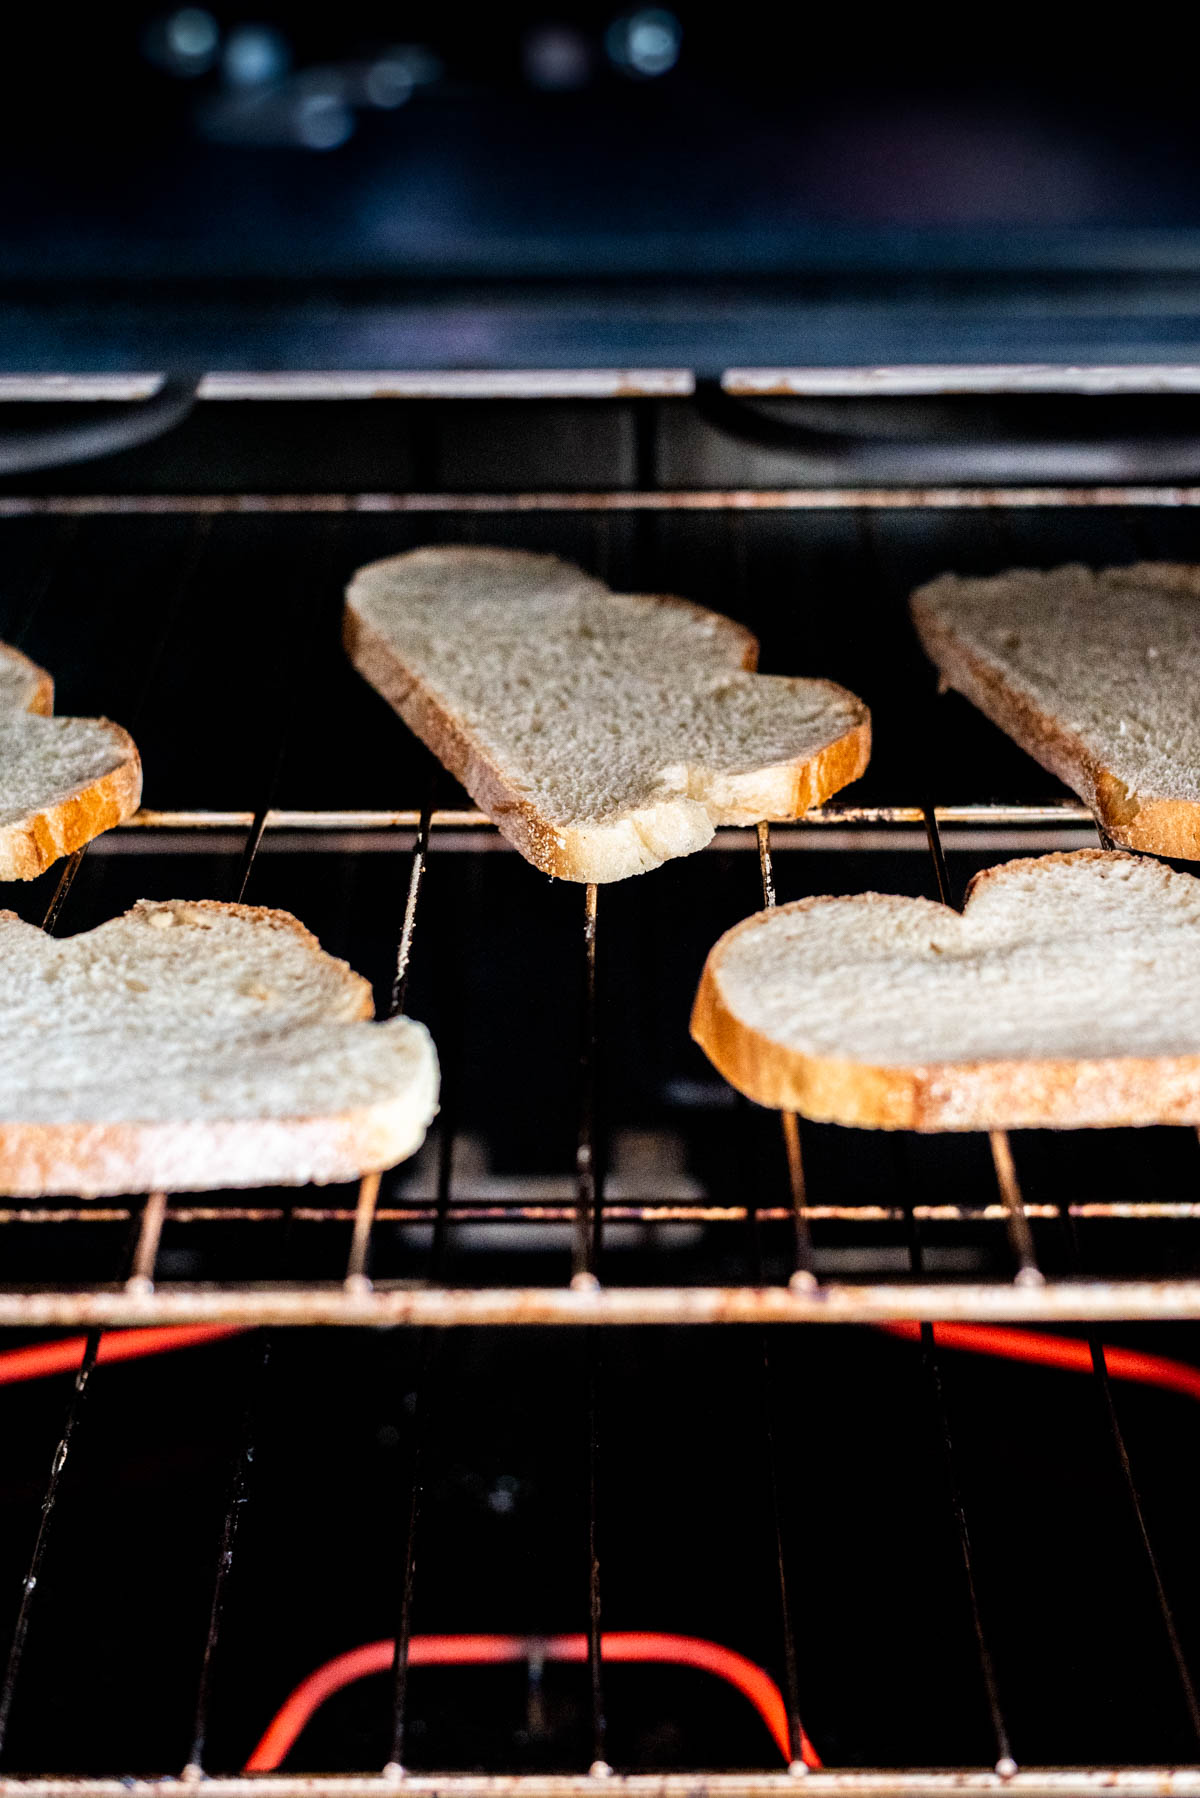 slices of bread being baked in an oven.